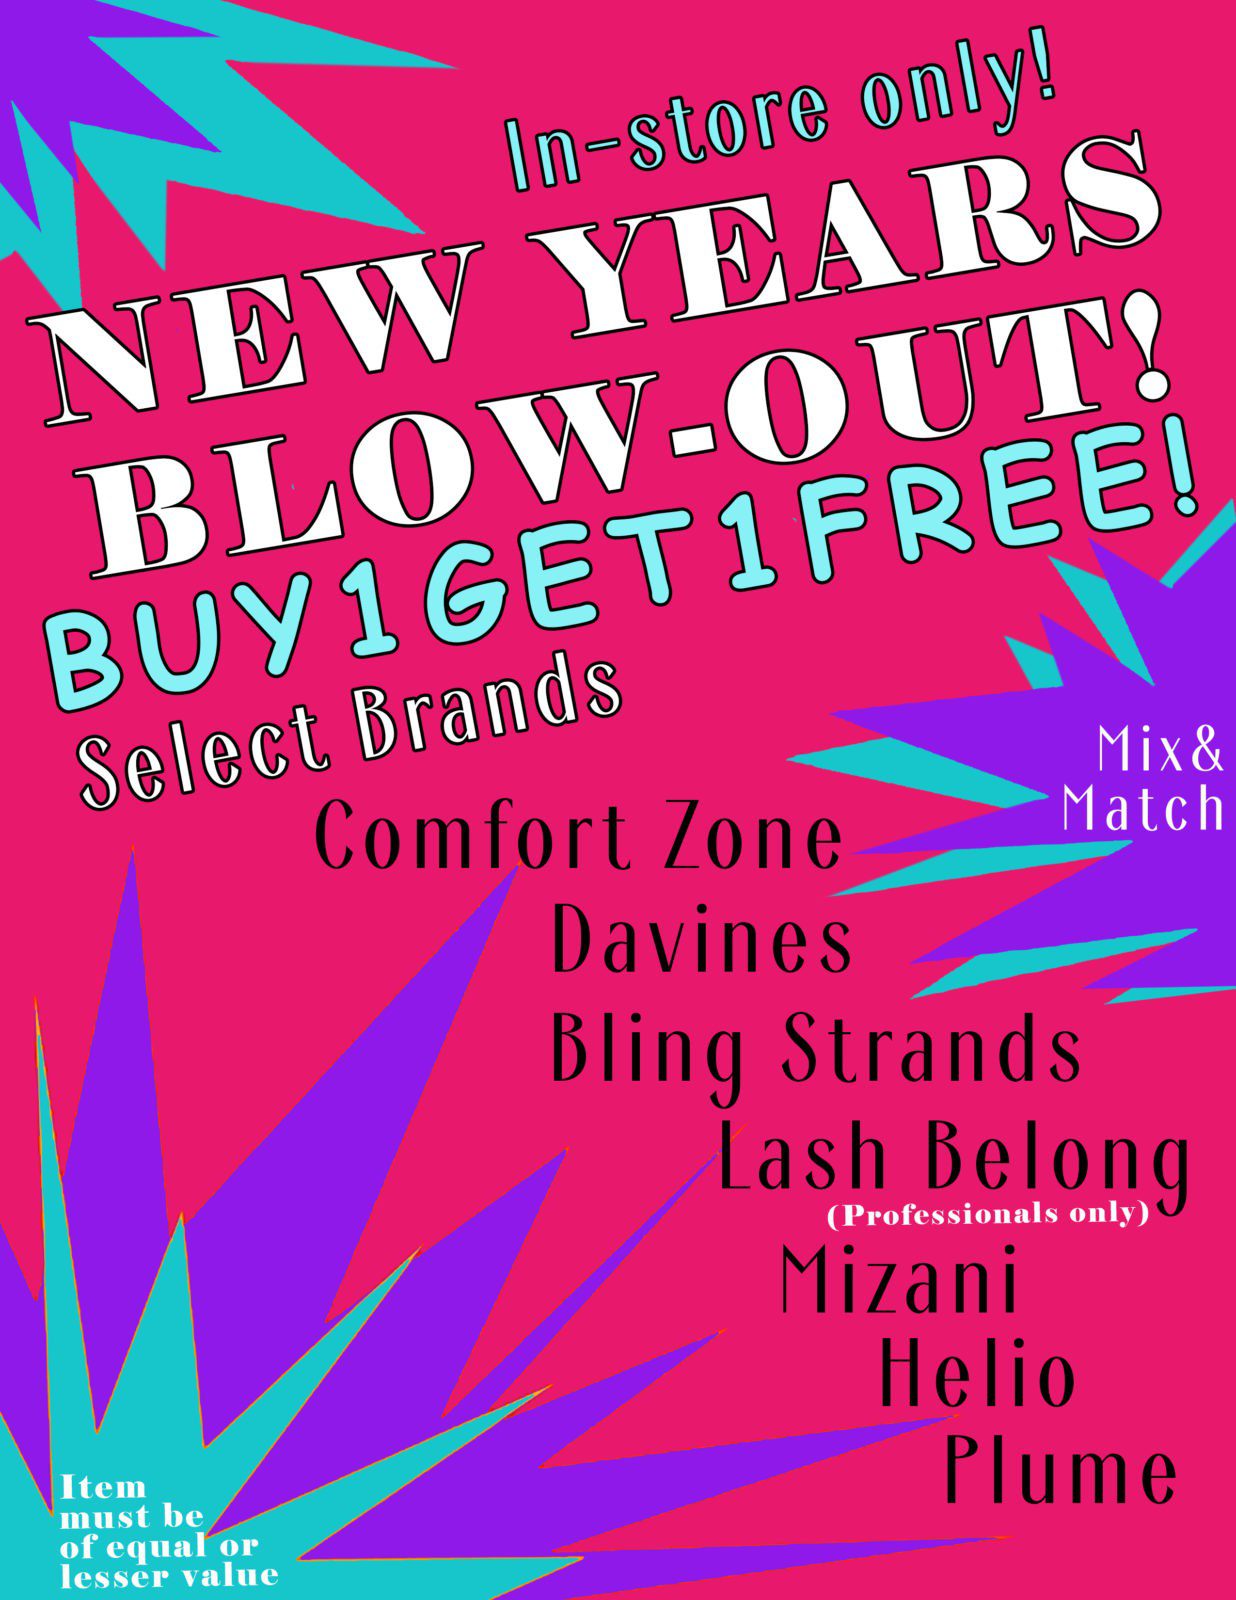 New Years Blow-out